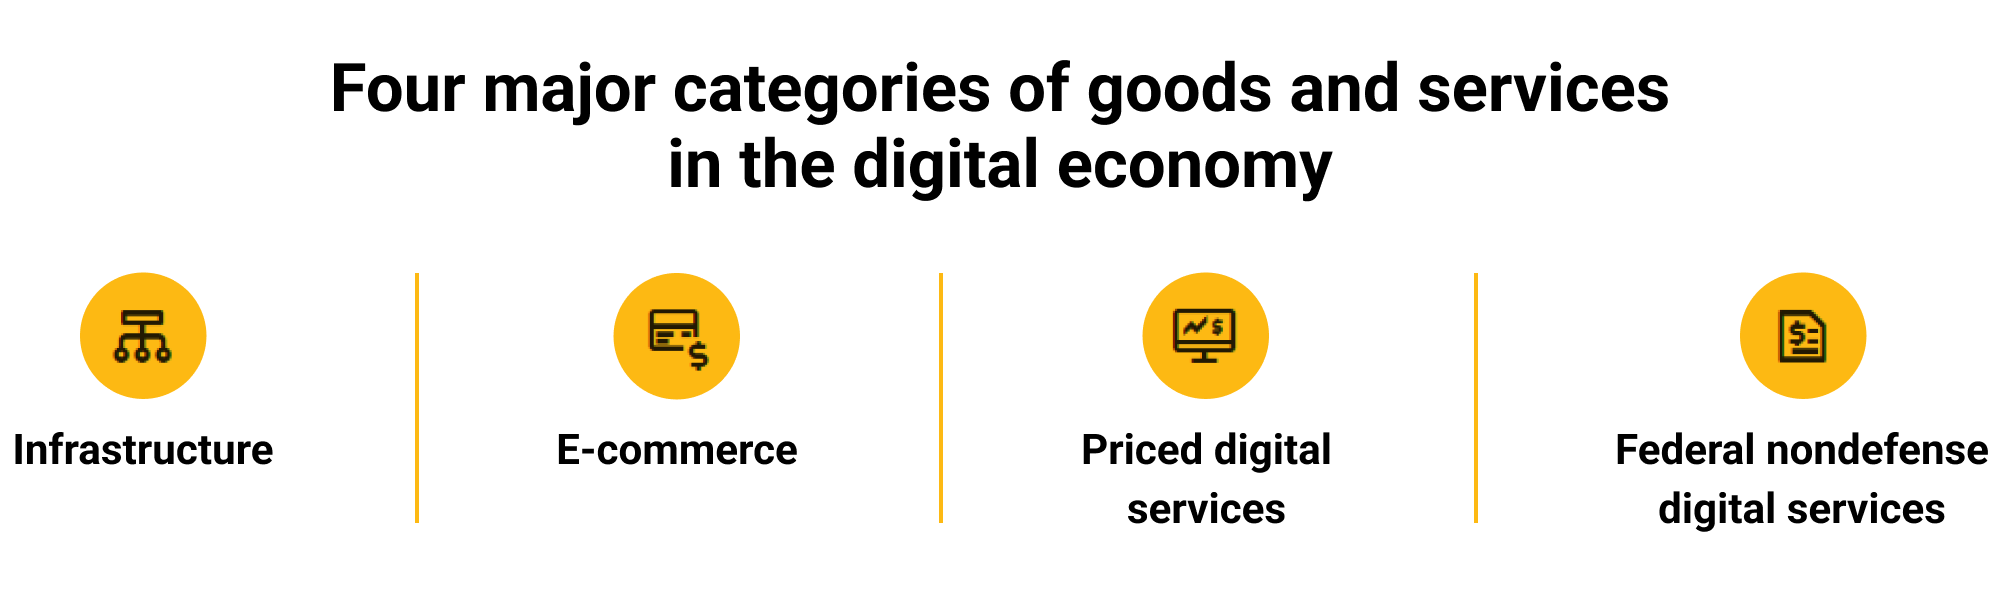 Four major categories of goods and services in the digital economy